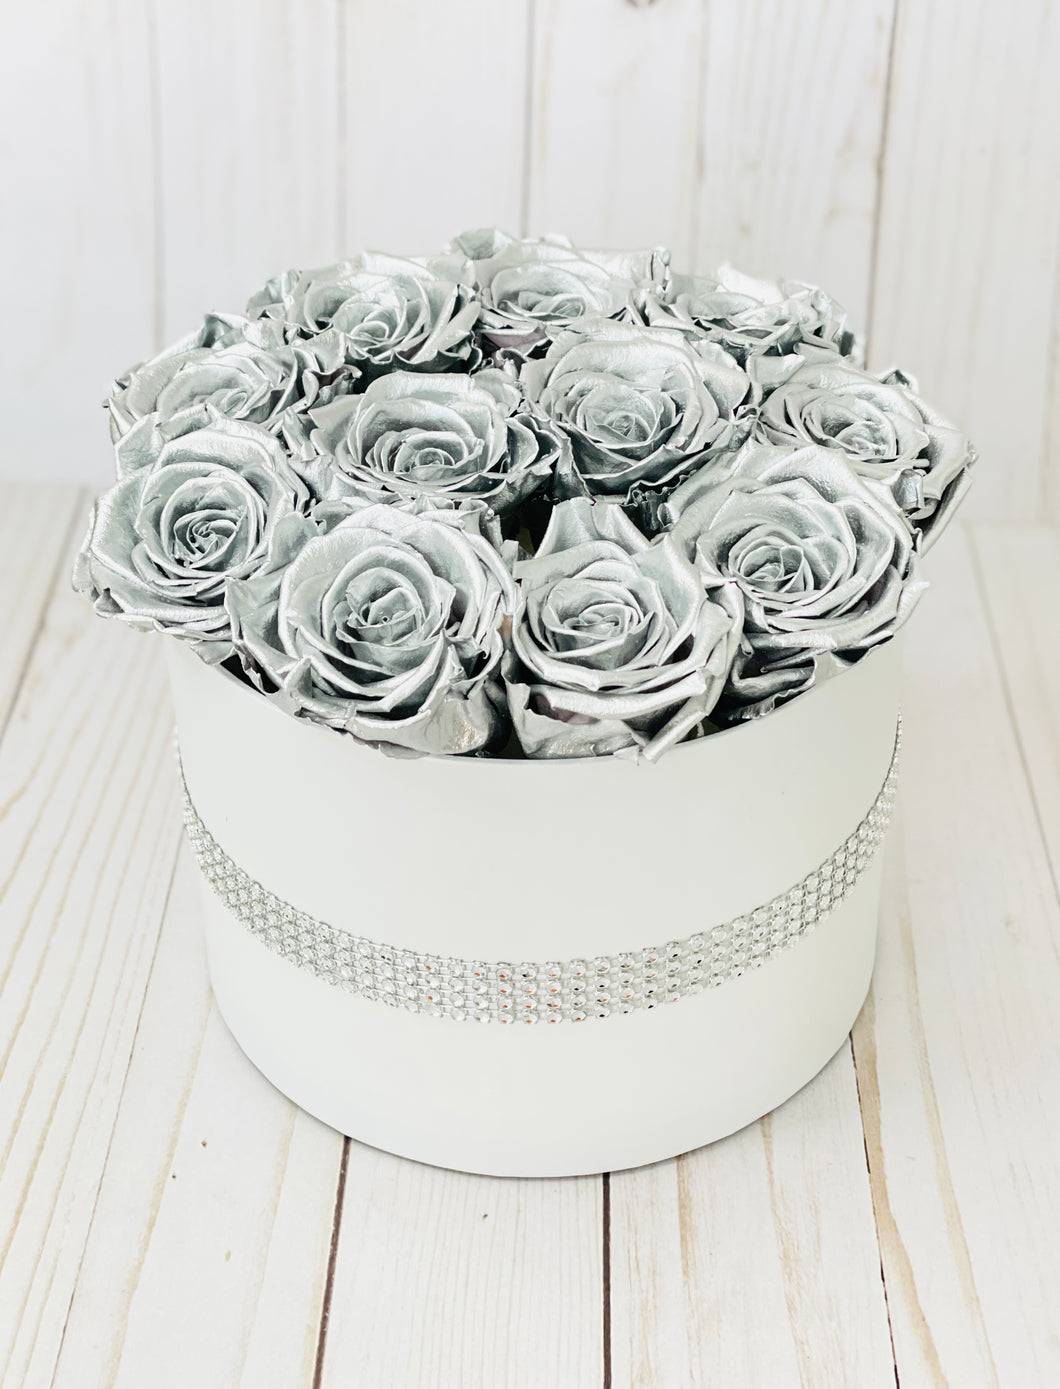 Medium Round Box with Silver Roses